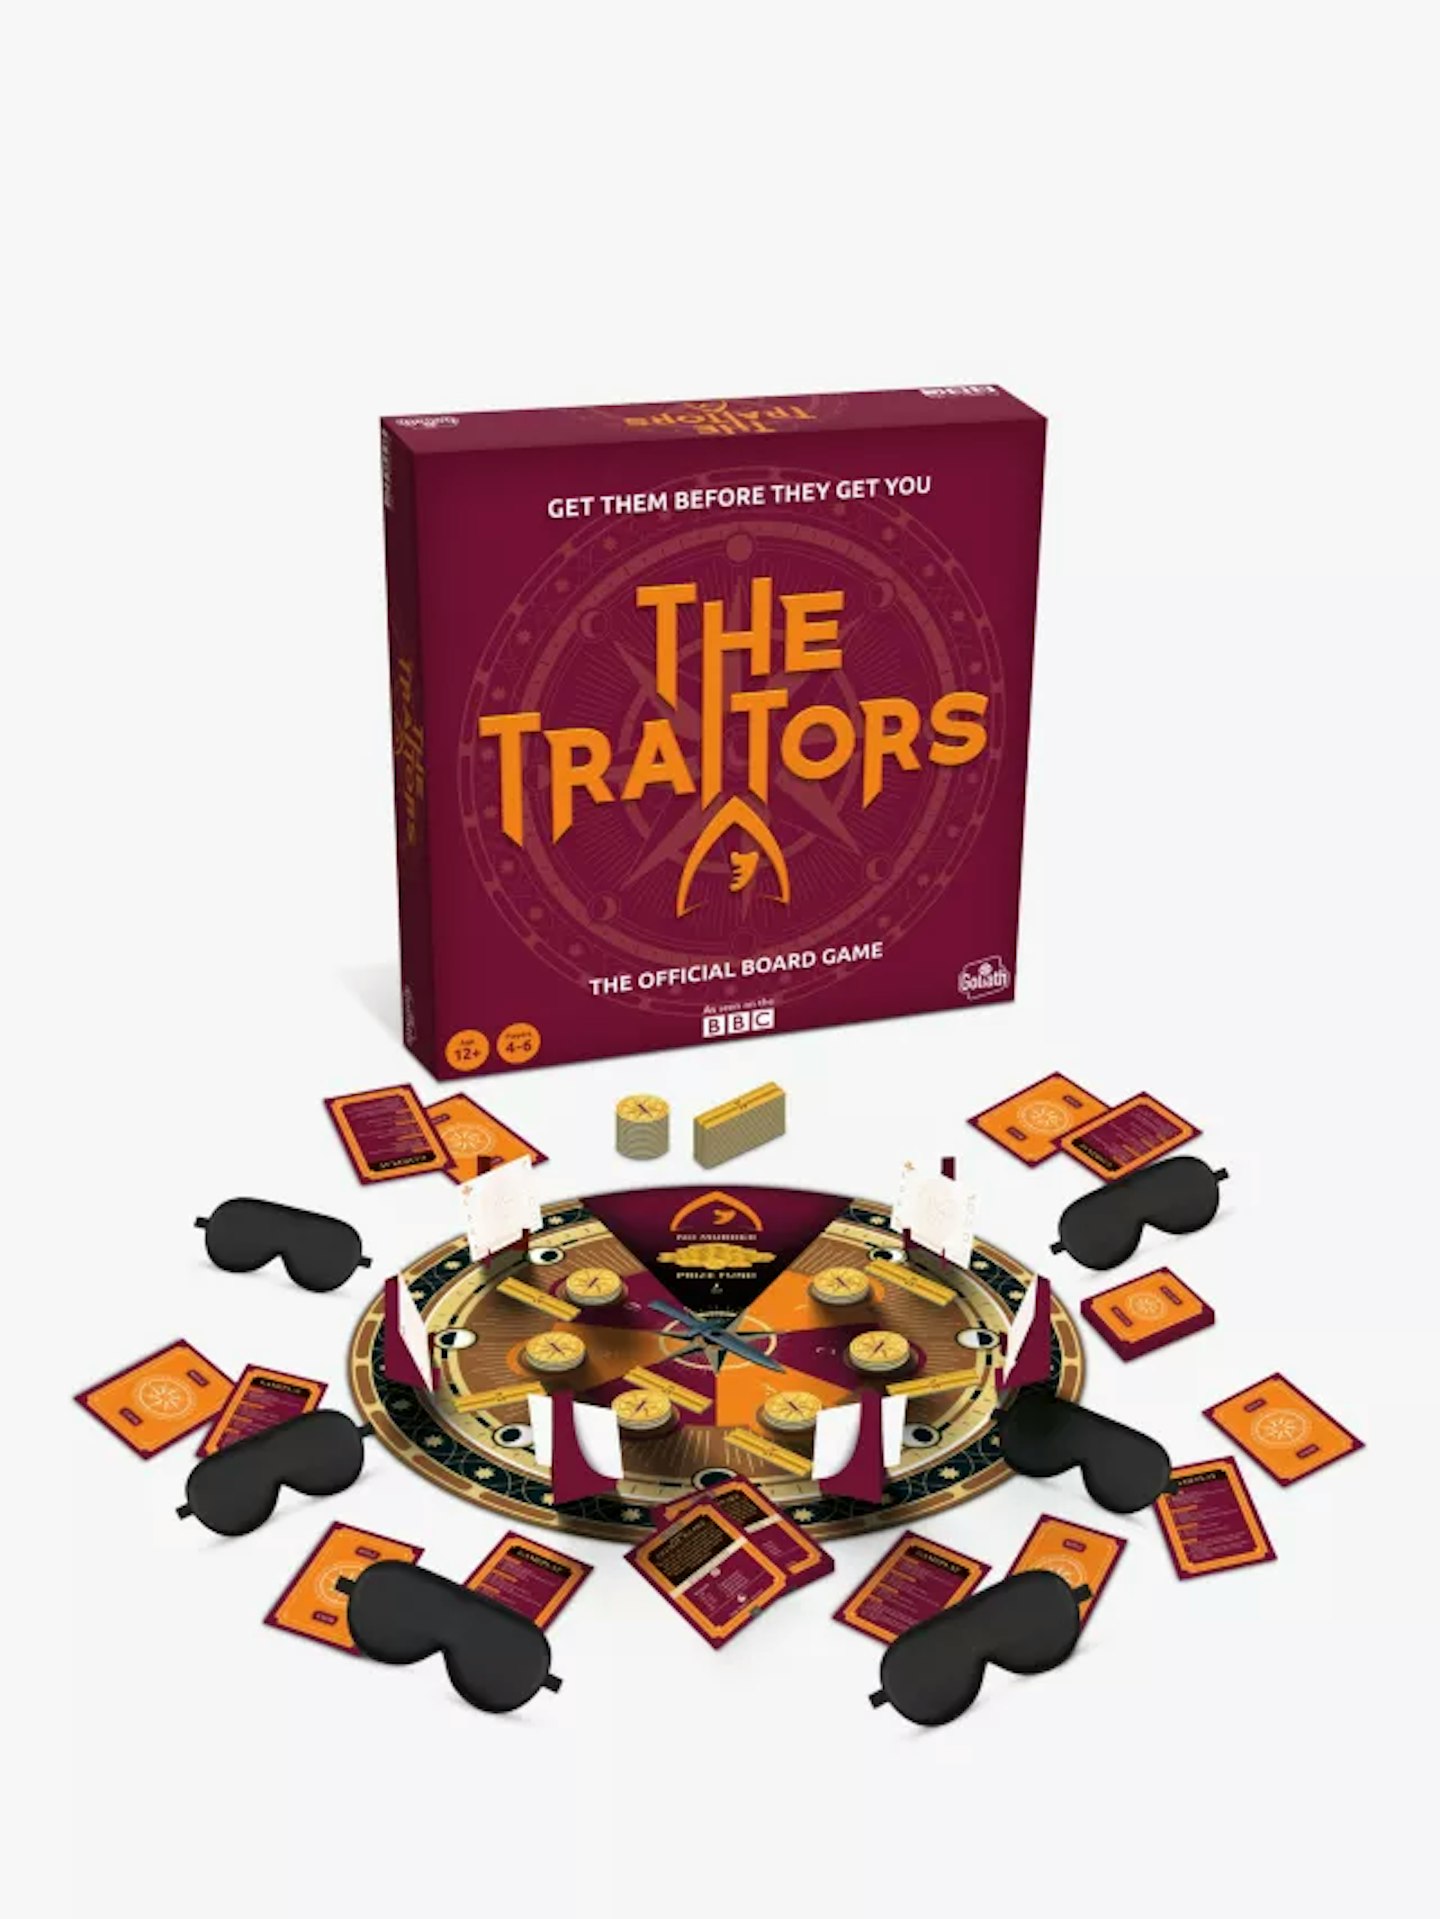 The Traitors board game box and contents